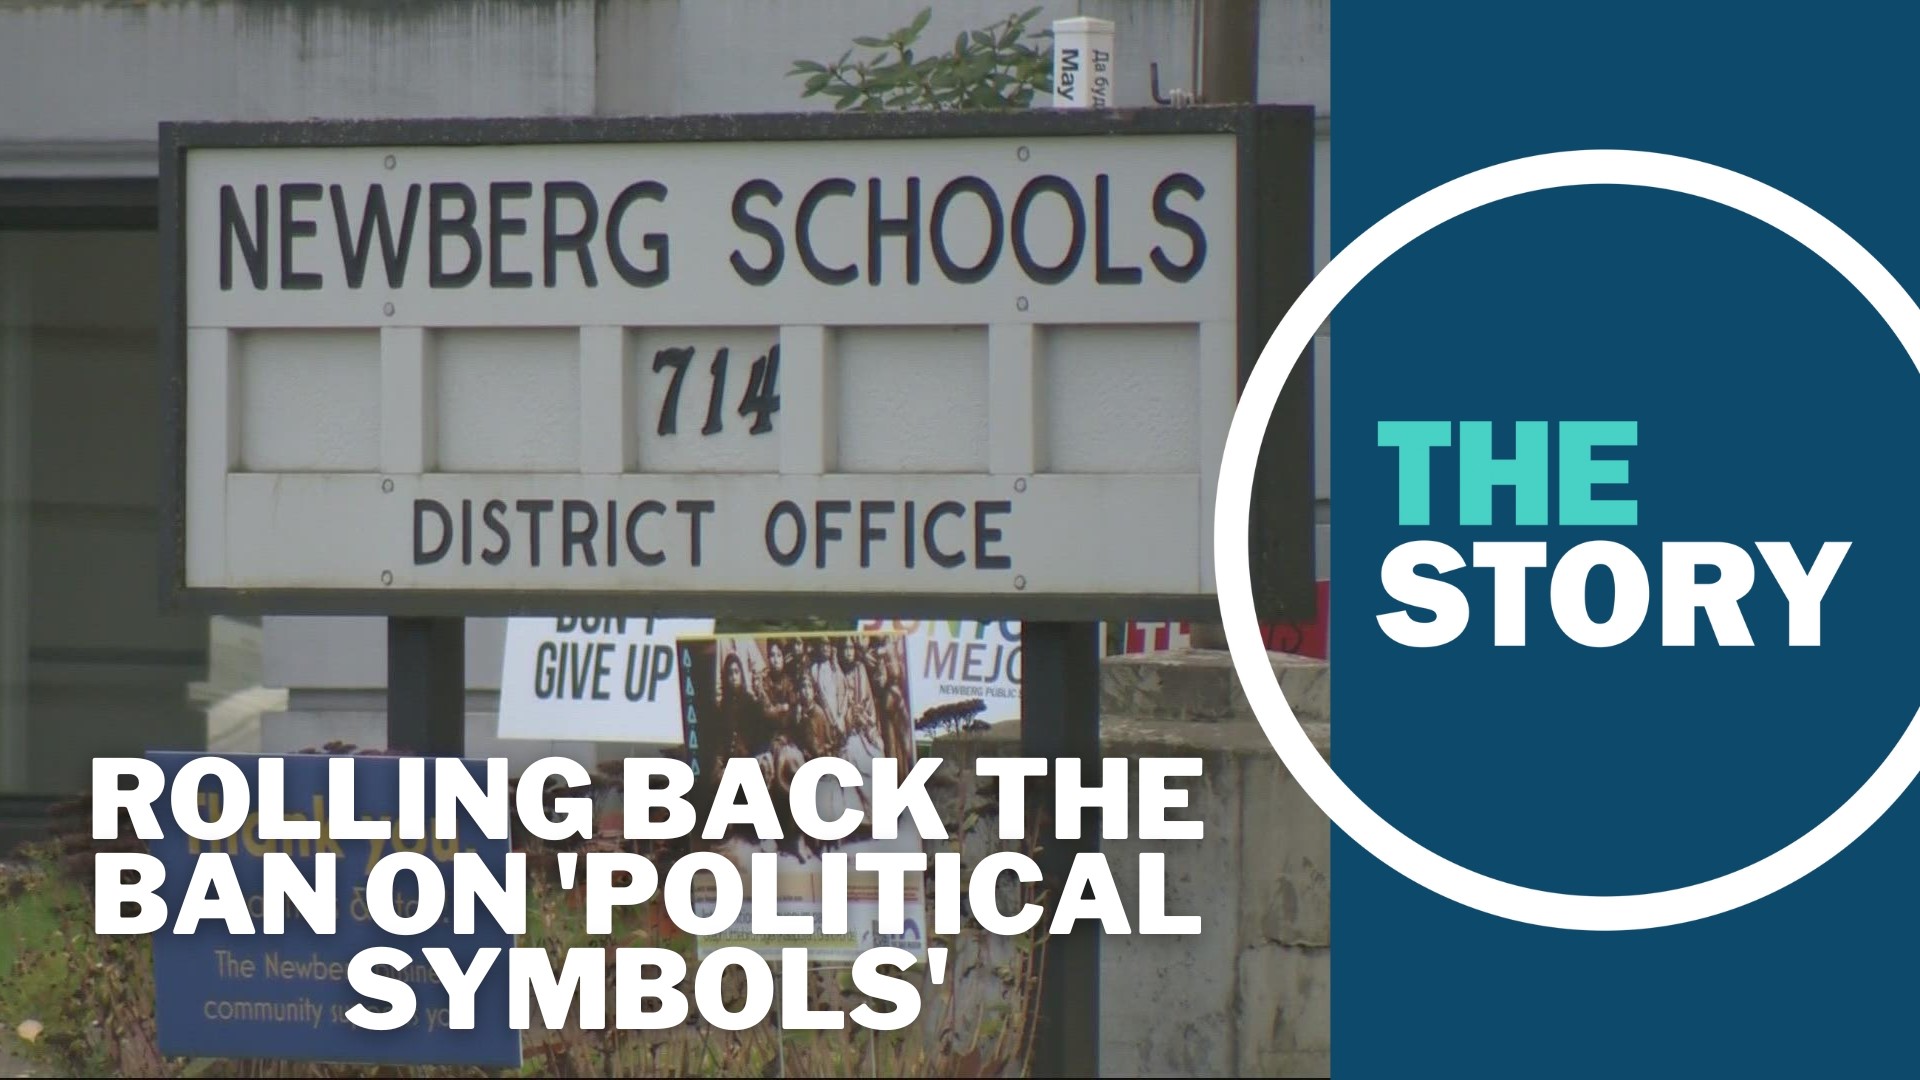 Originally, board members banned Black Lives Matter and LGBTQ symbols. Now the ban is gone, the result of several lawsuits against the district.